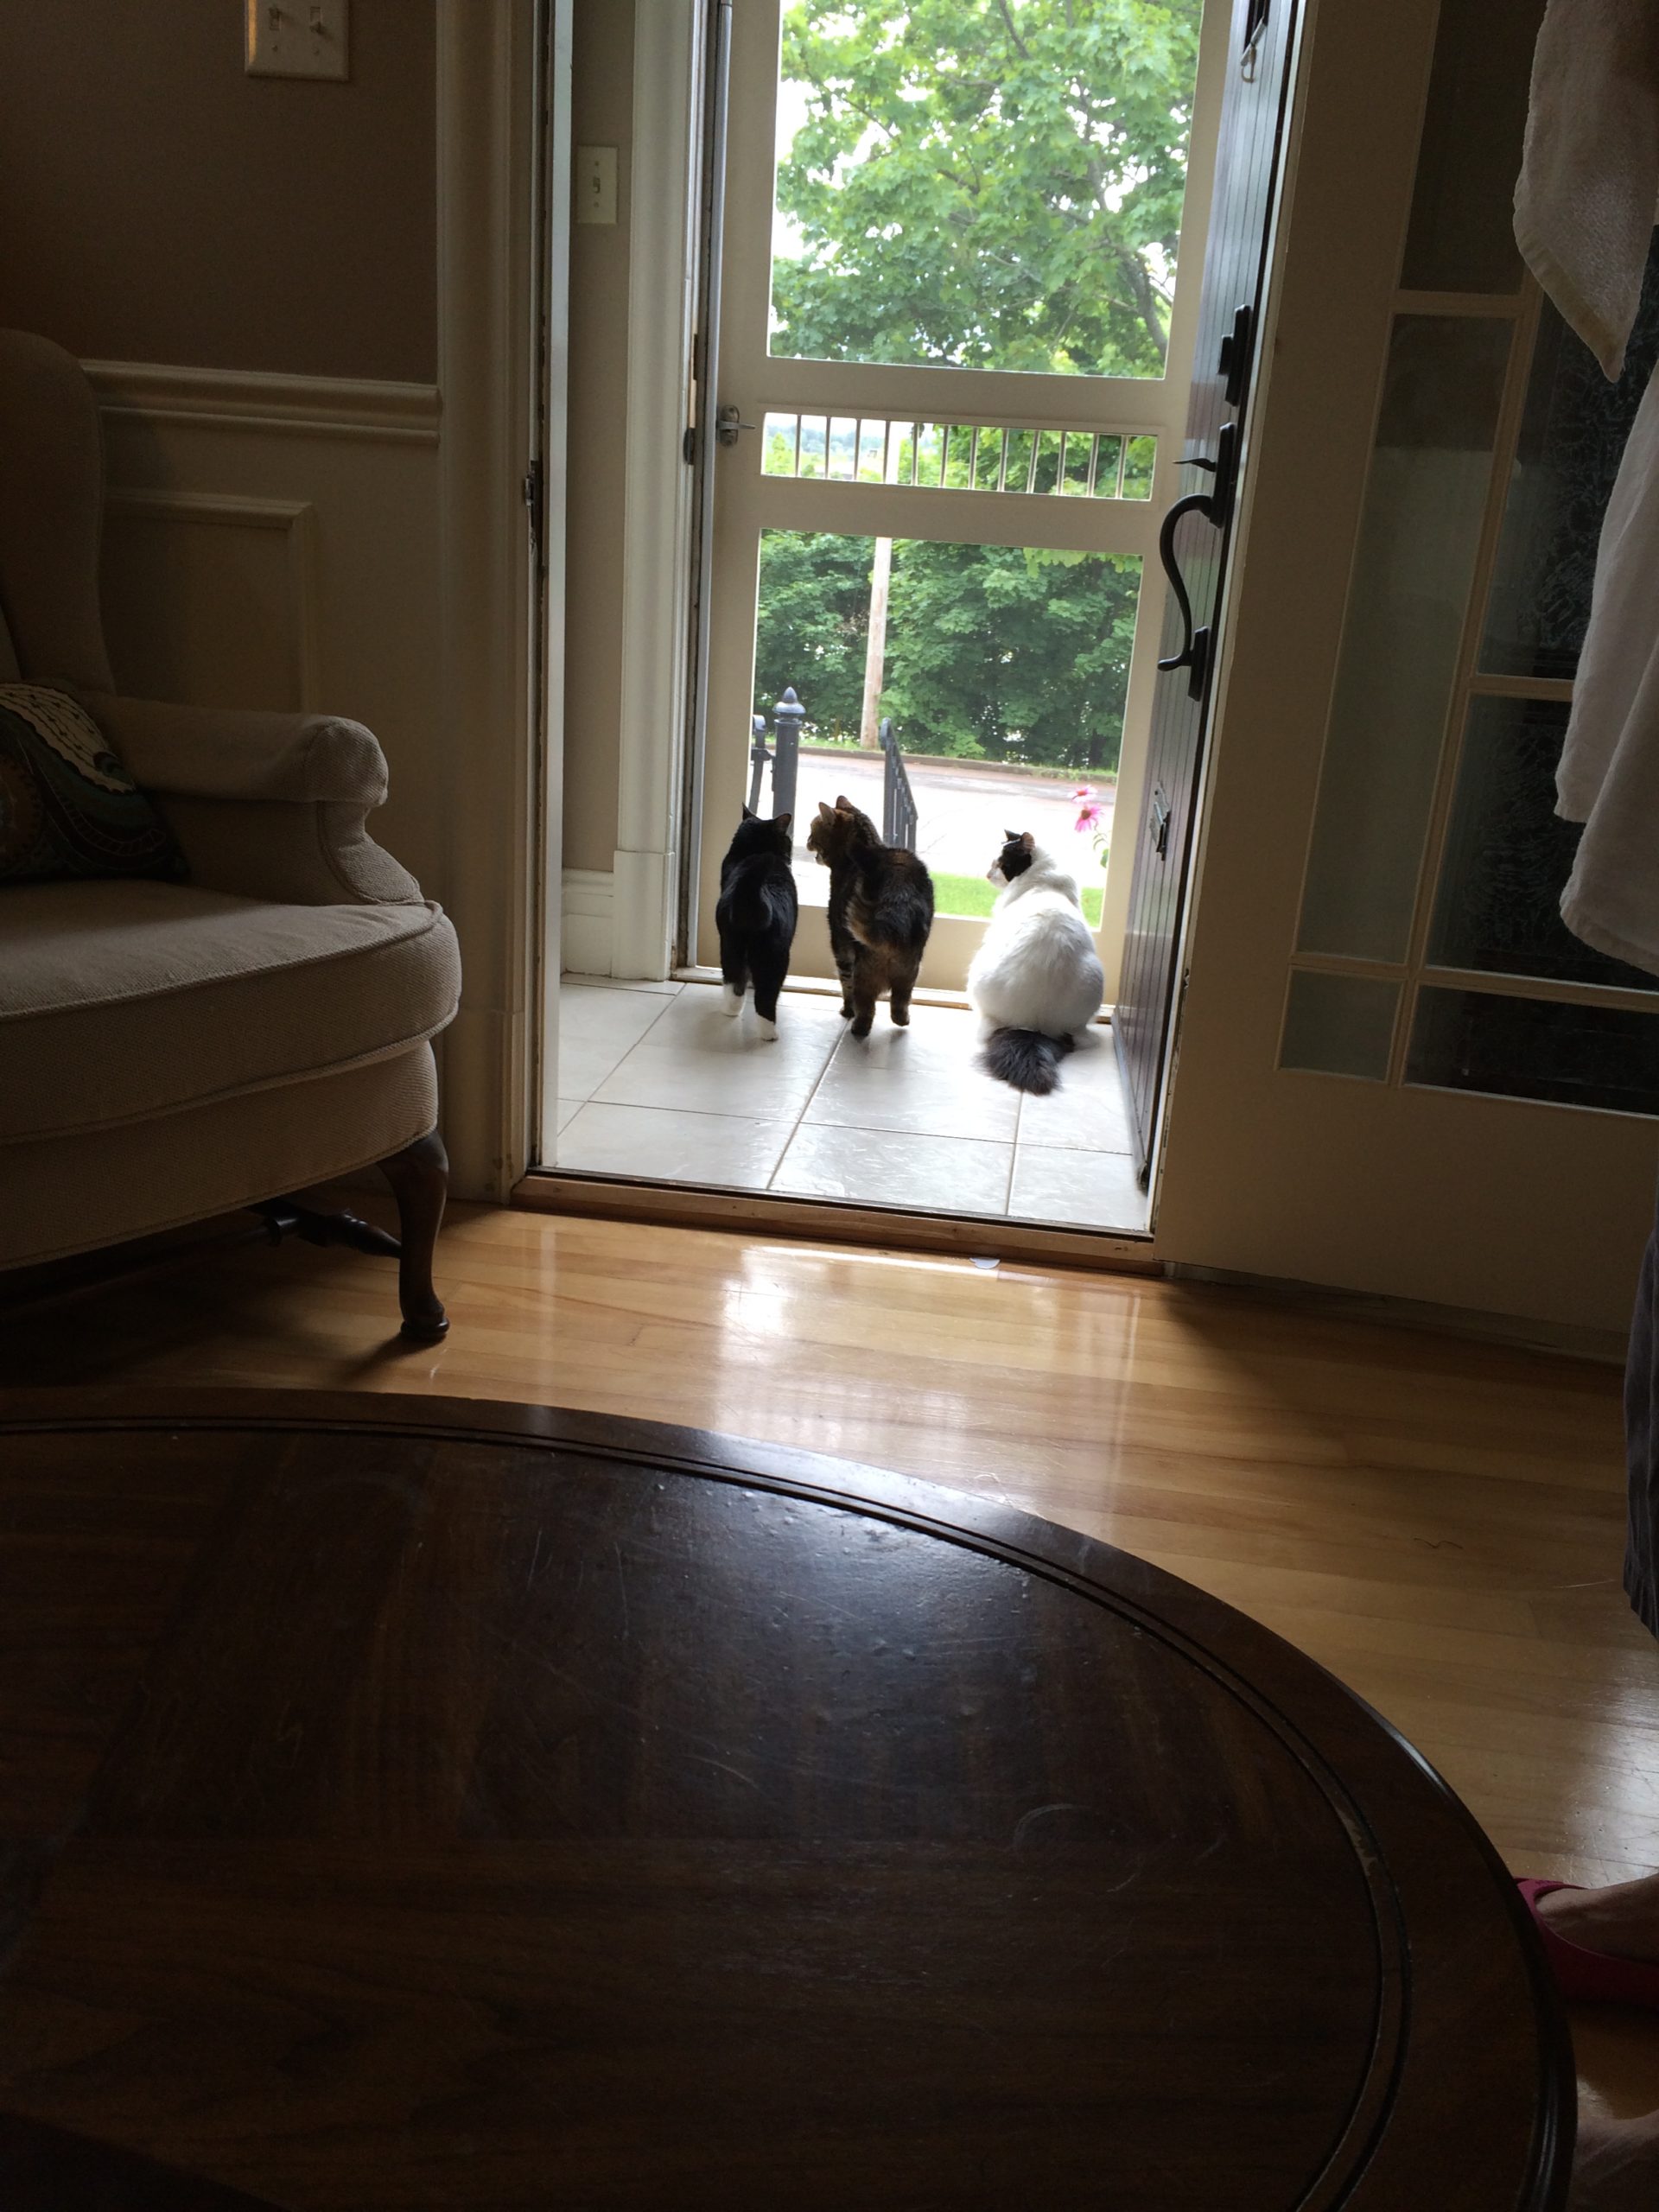 Back view of three cats looking out of a screen door